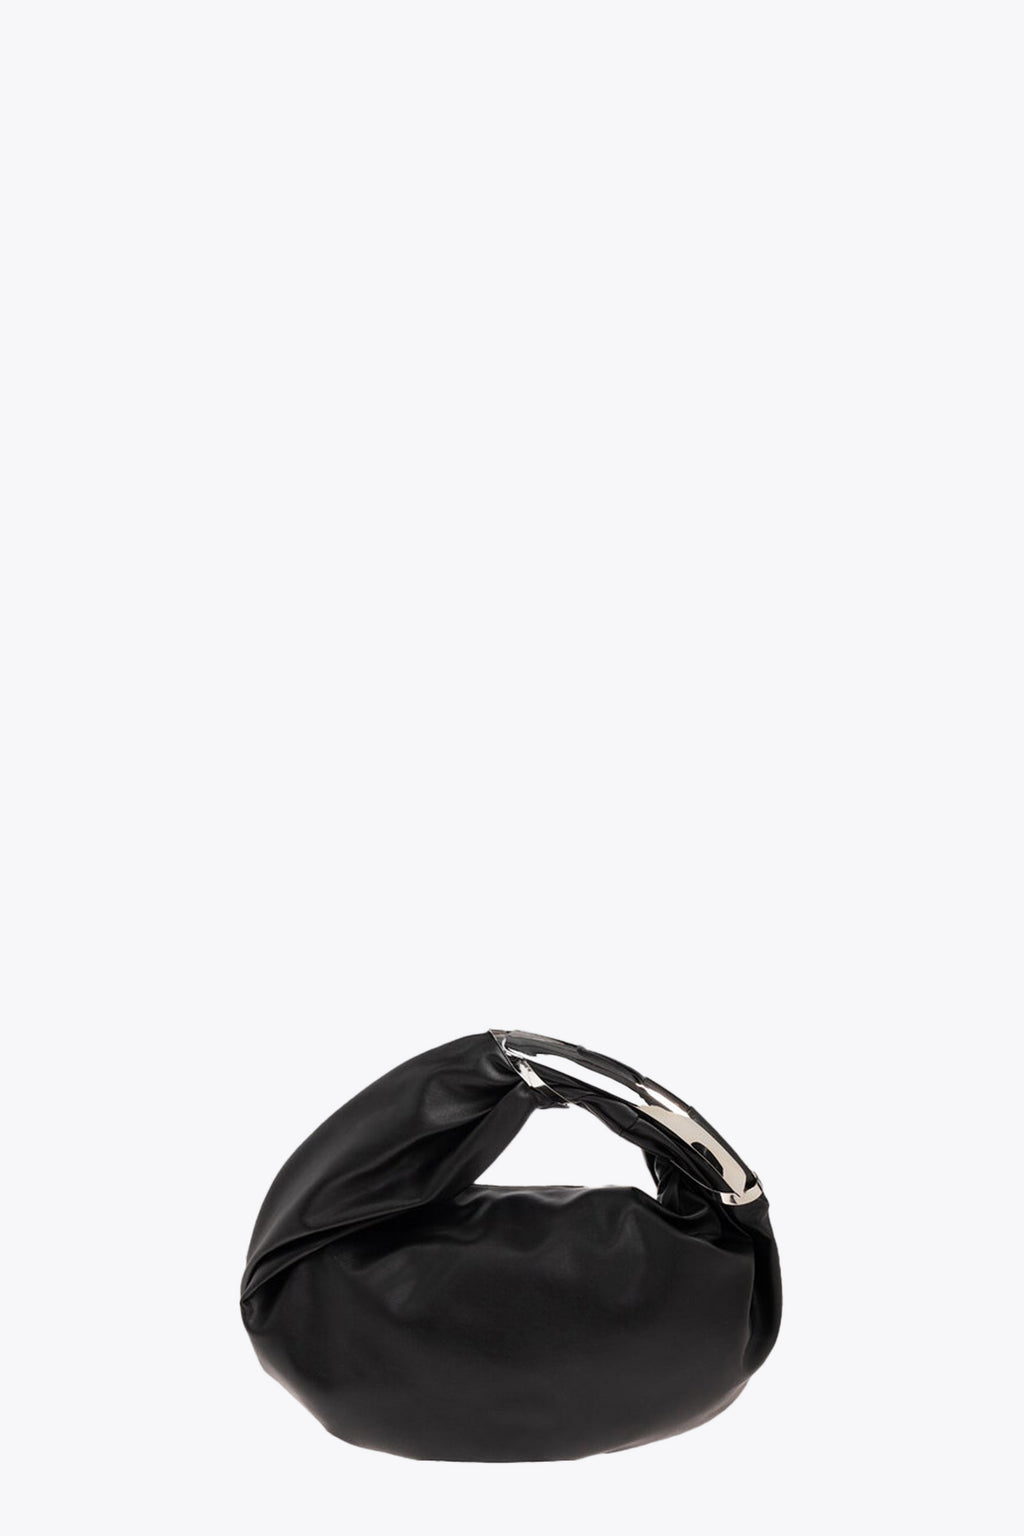 alt-image__Black-twisted-synthetic-leather-bag---Grab-D-Hobo-M